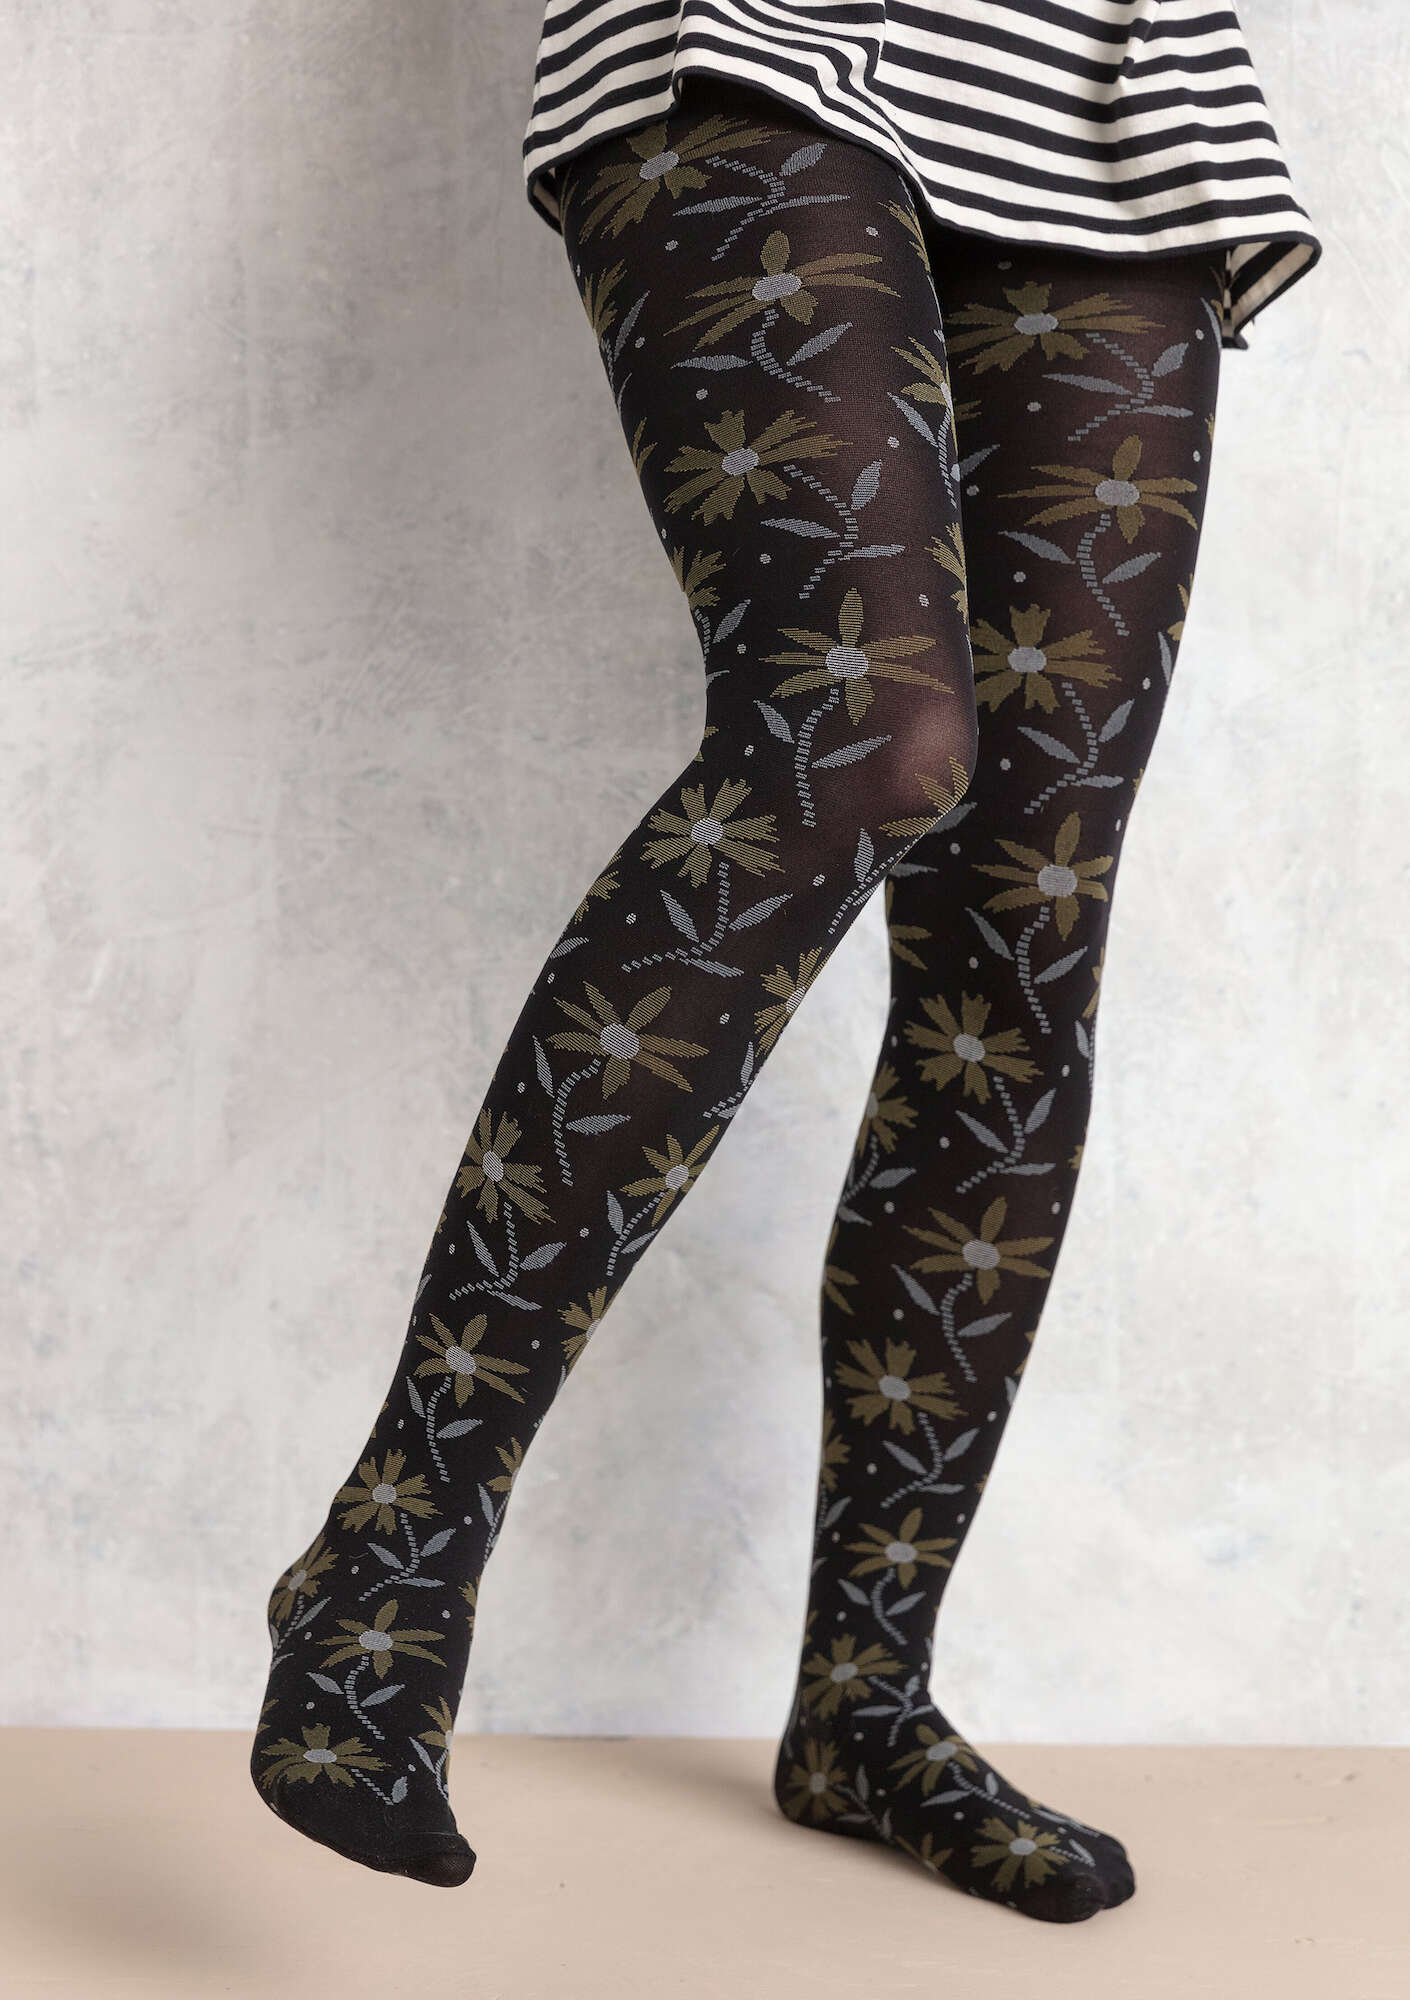 “Isolde” jacquard-patterned tights in recycled nylon black